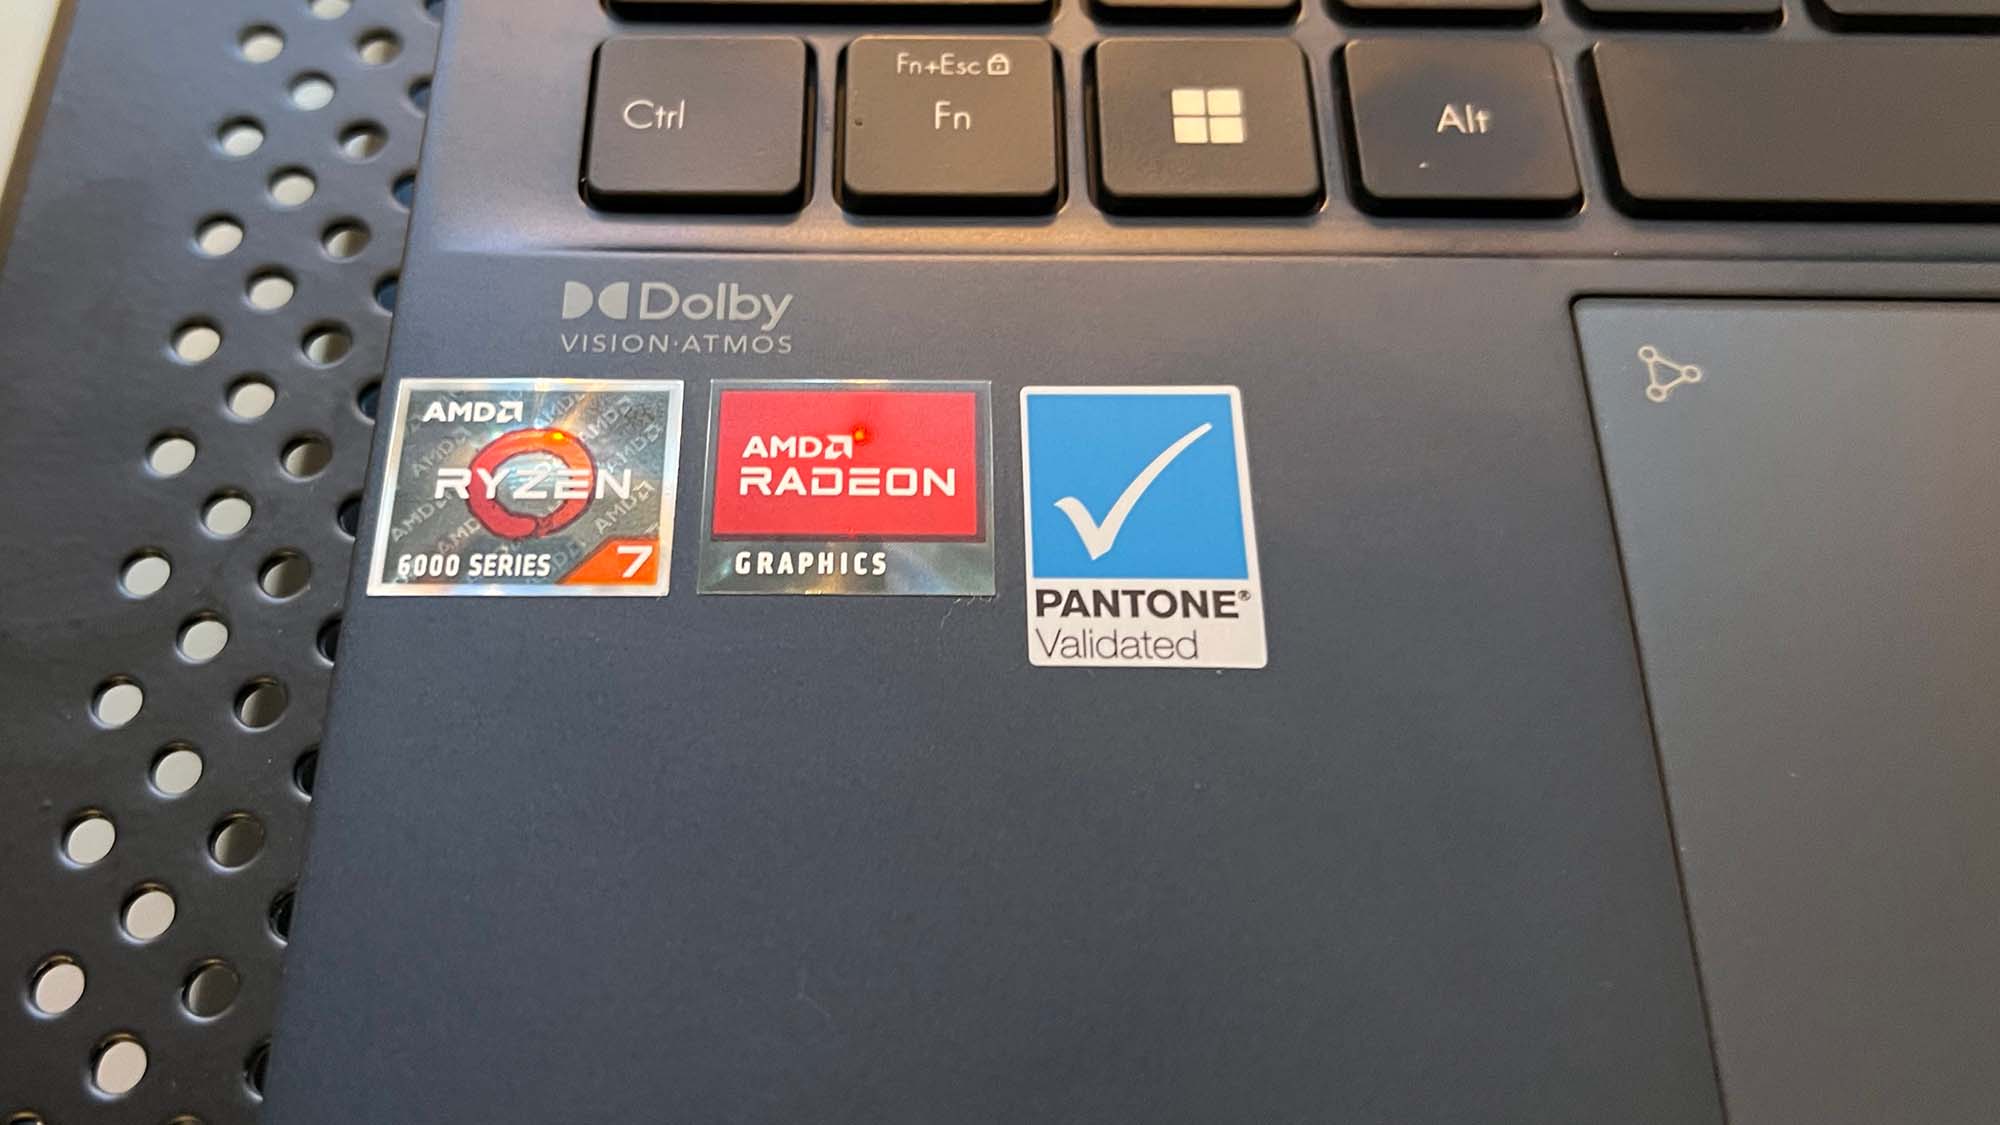 A closeup of the AMD, Radeon, and Pantone-certified stickers on the Asus Zenbook S 13 OLED